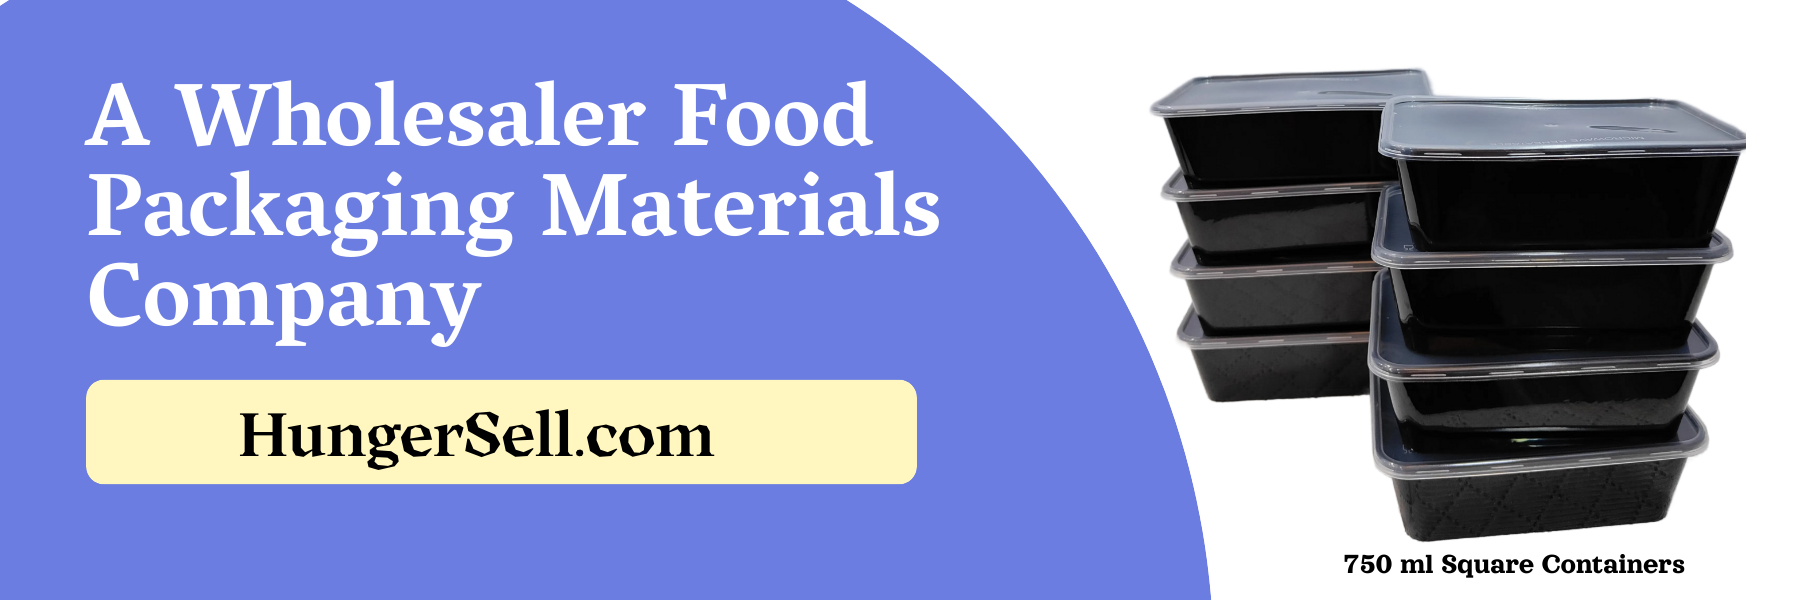 Food Packaging Materials - HungerSell